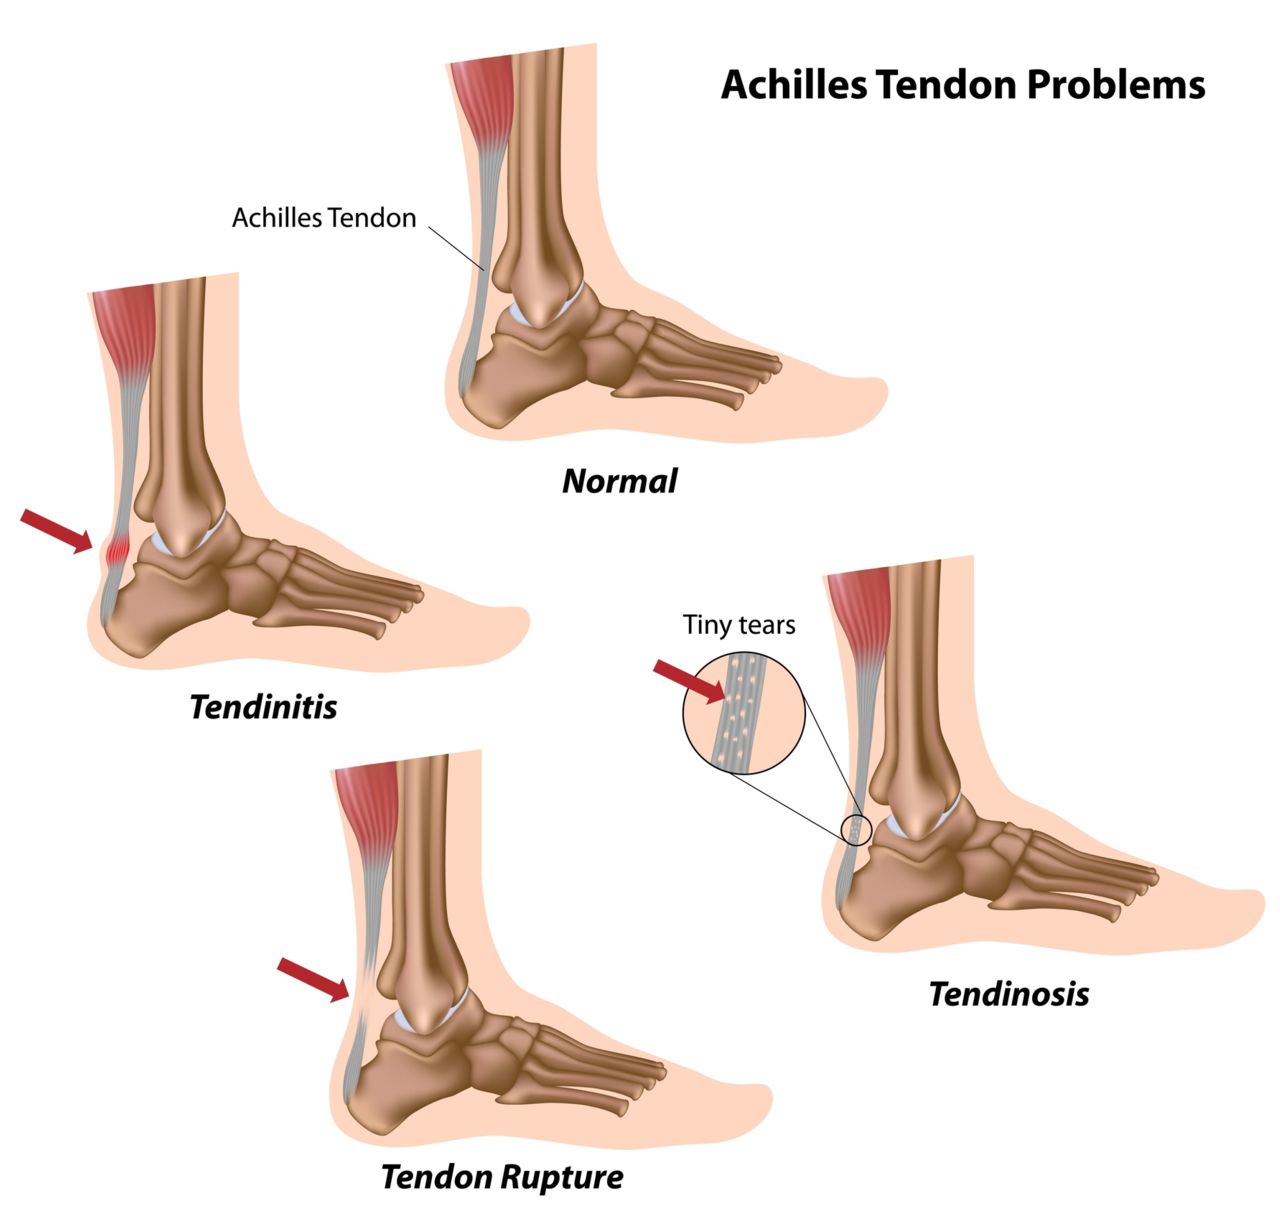 Achilles Tendon Injuries and Ruptures 